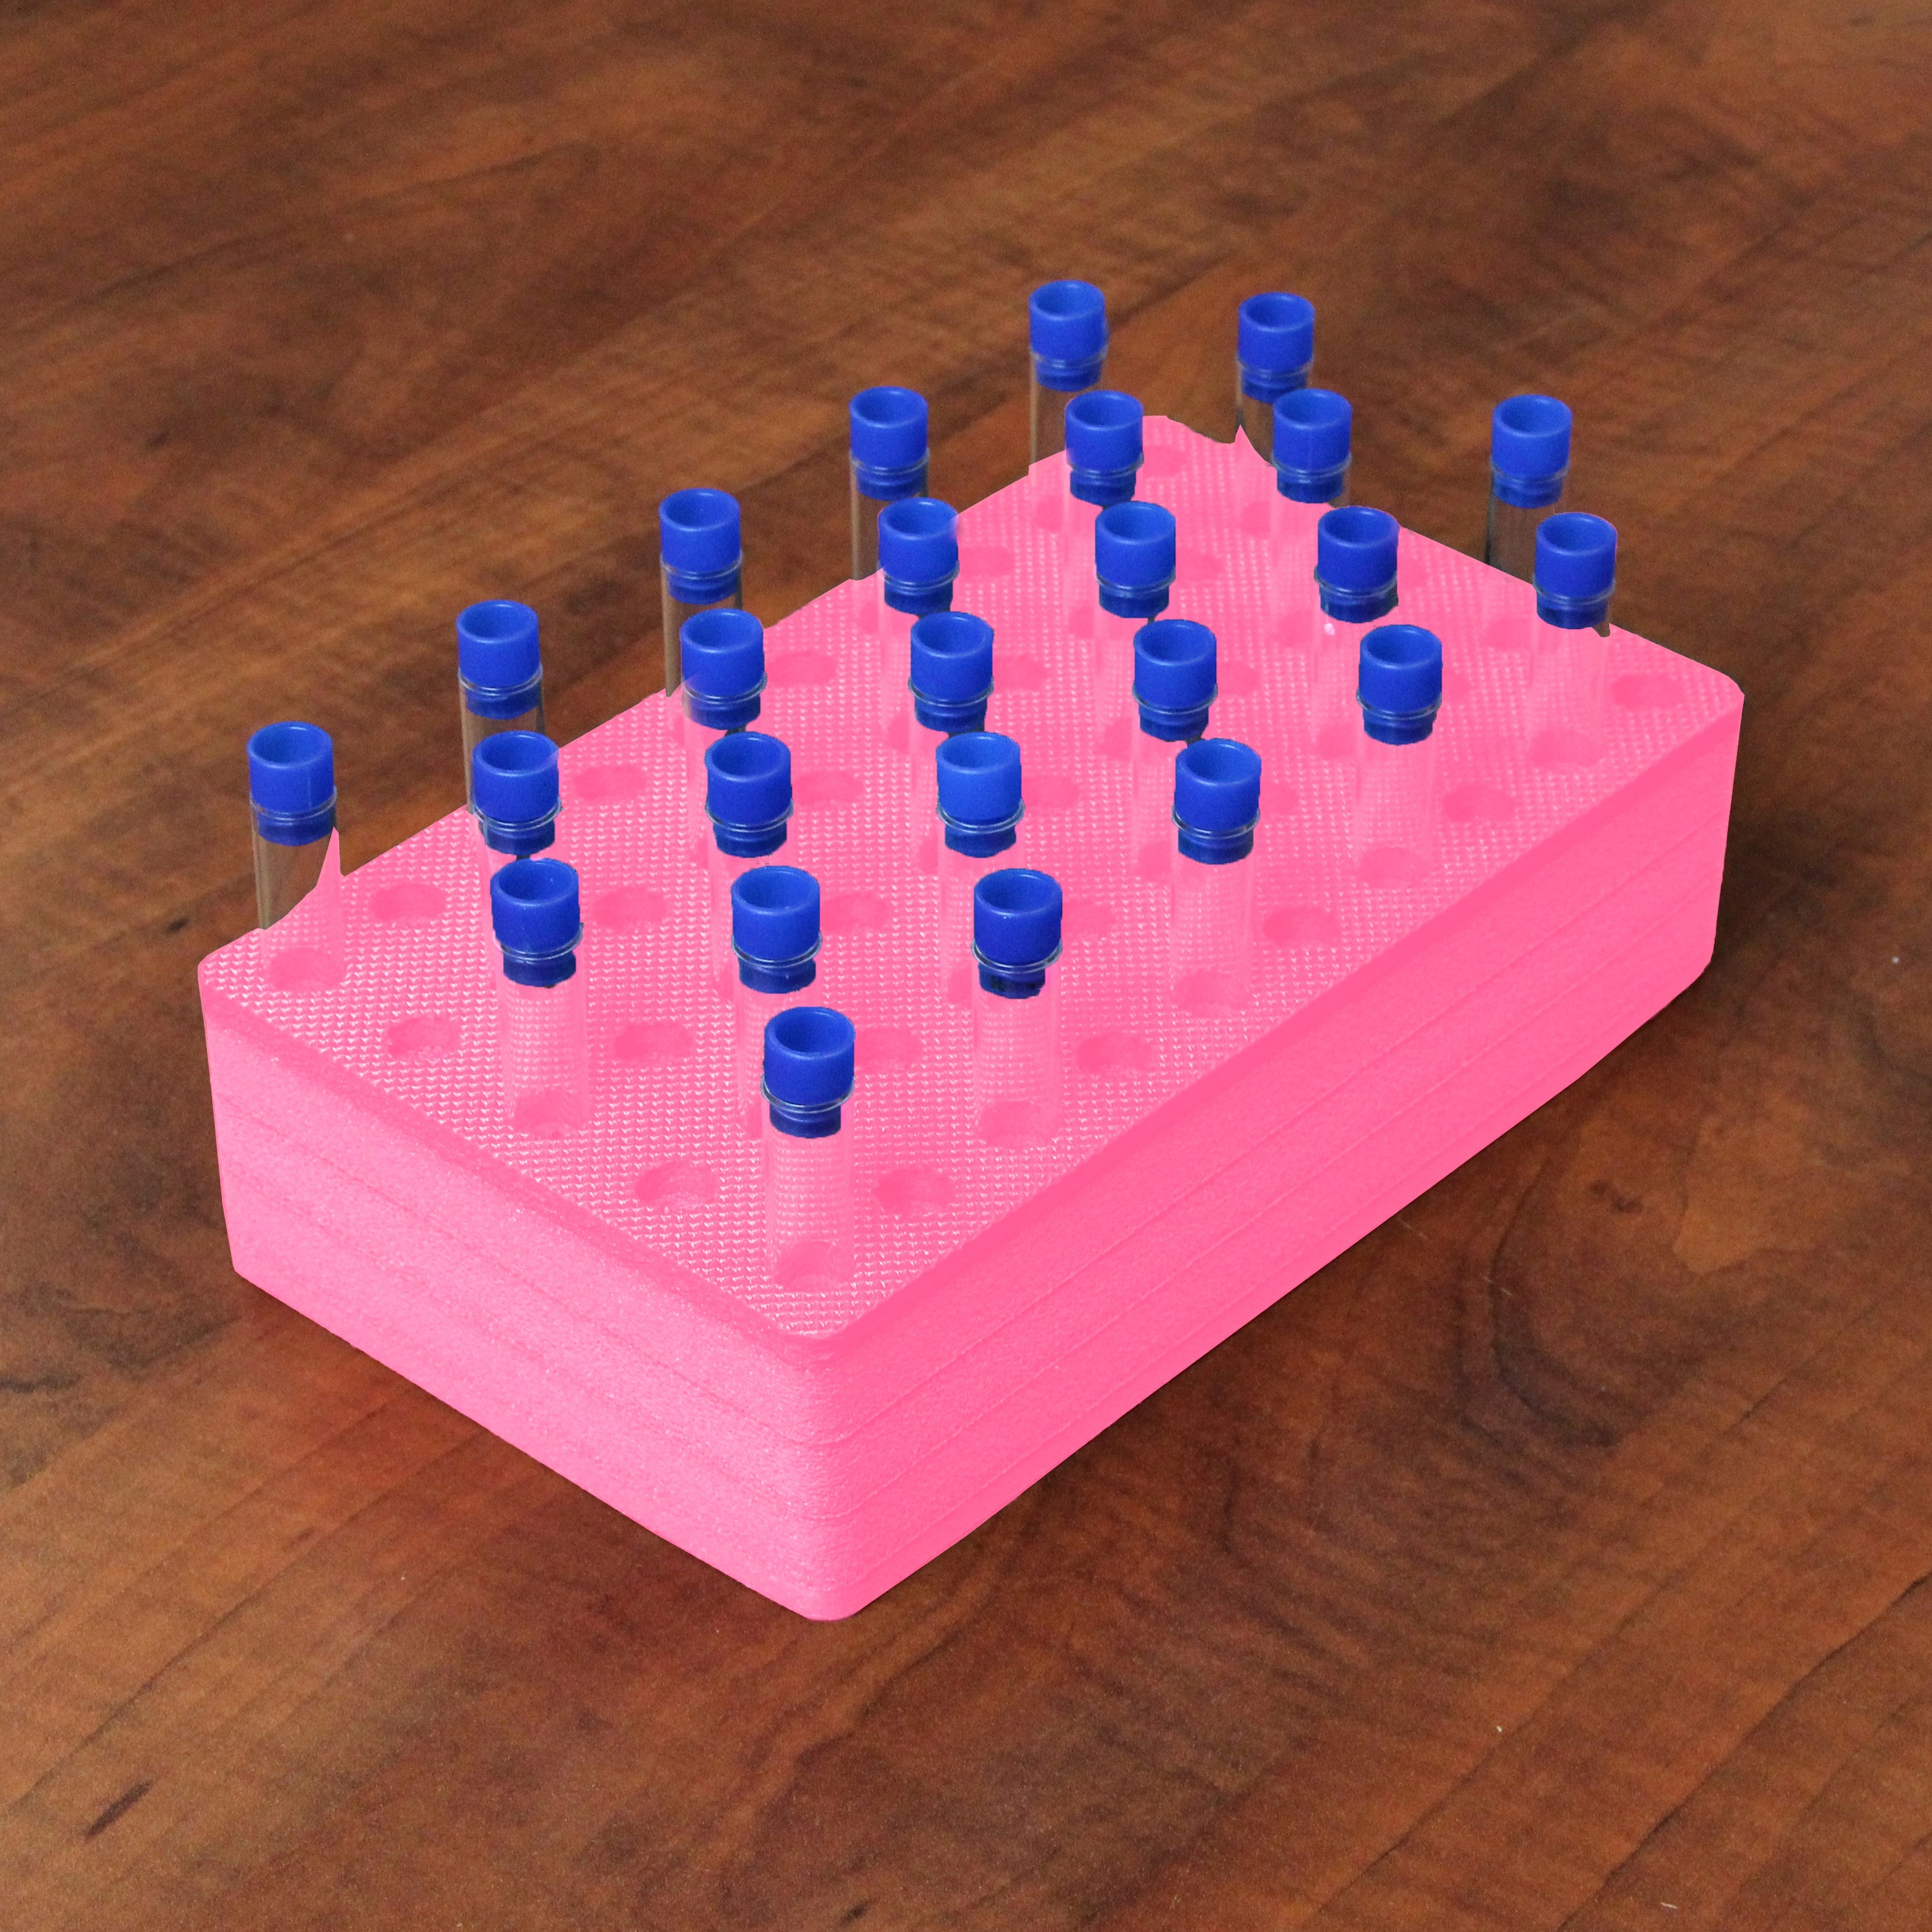 Polar Whale Test Tube Rack Pink Foam Storage Rack Organizer Stand Transport Holds 50 Tubes Each Fits up to 12mm Diameter Tubes